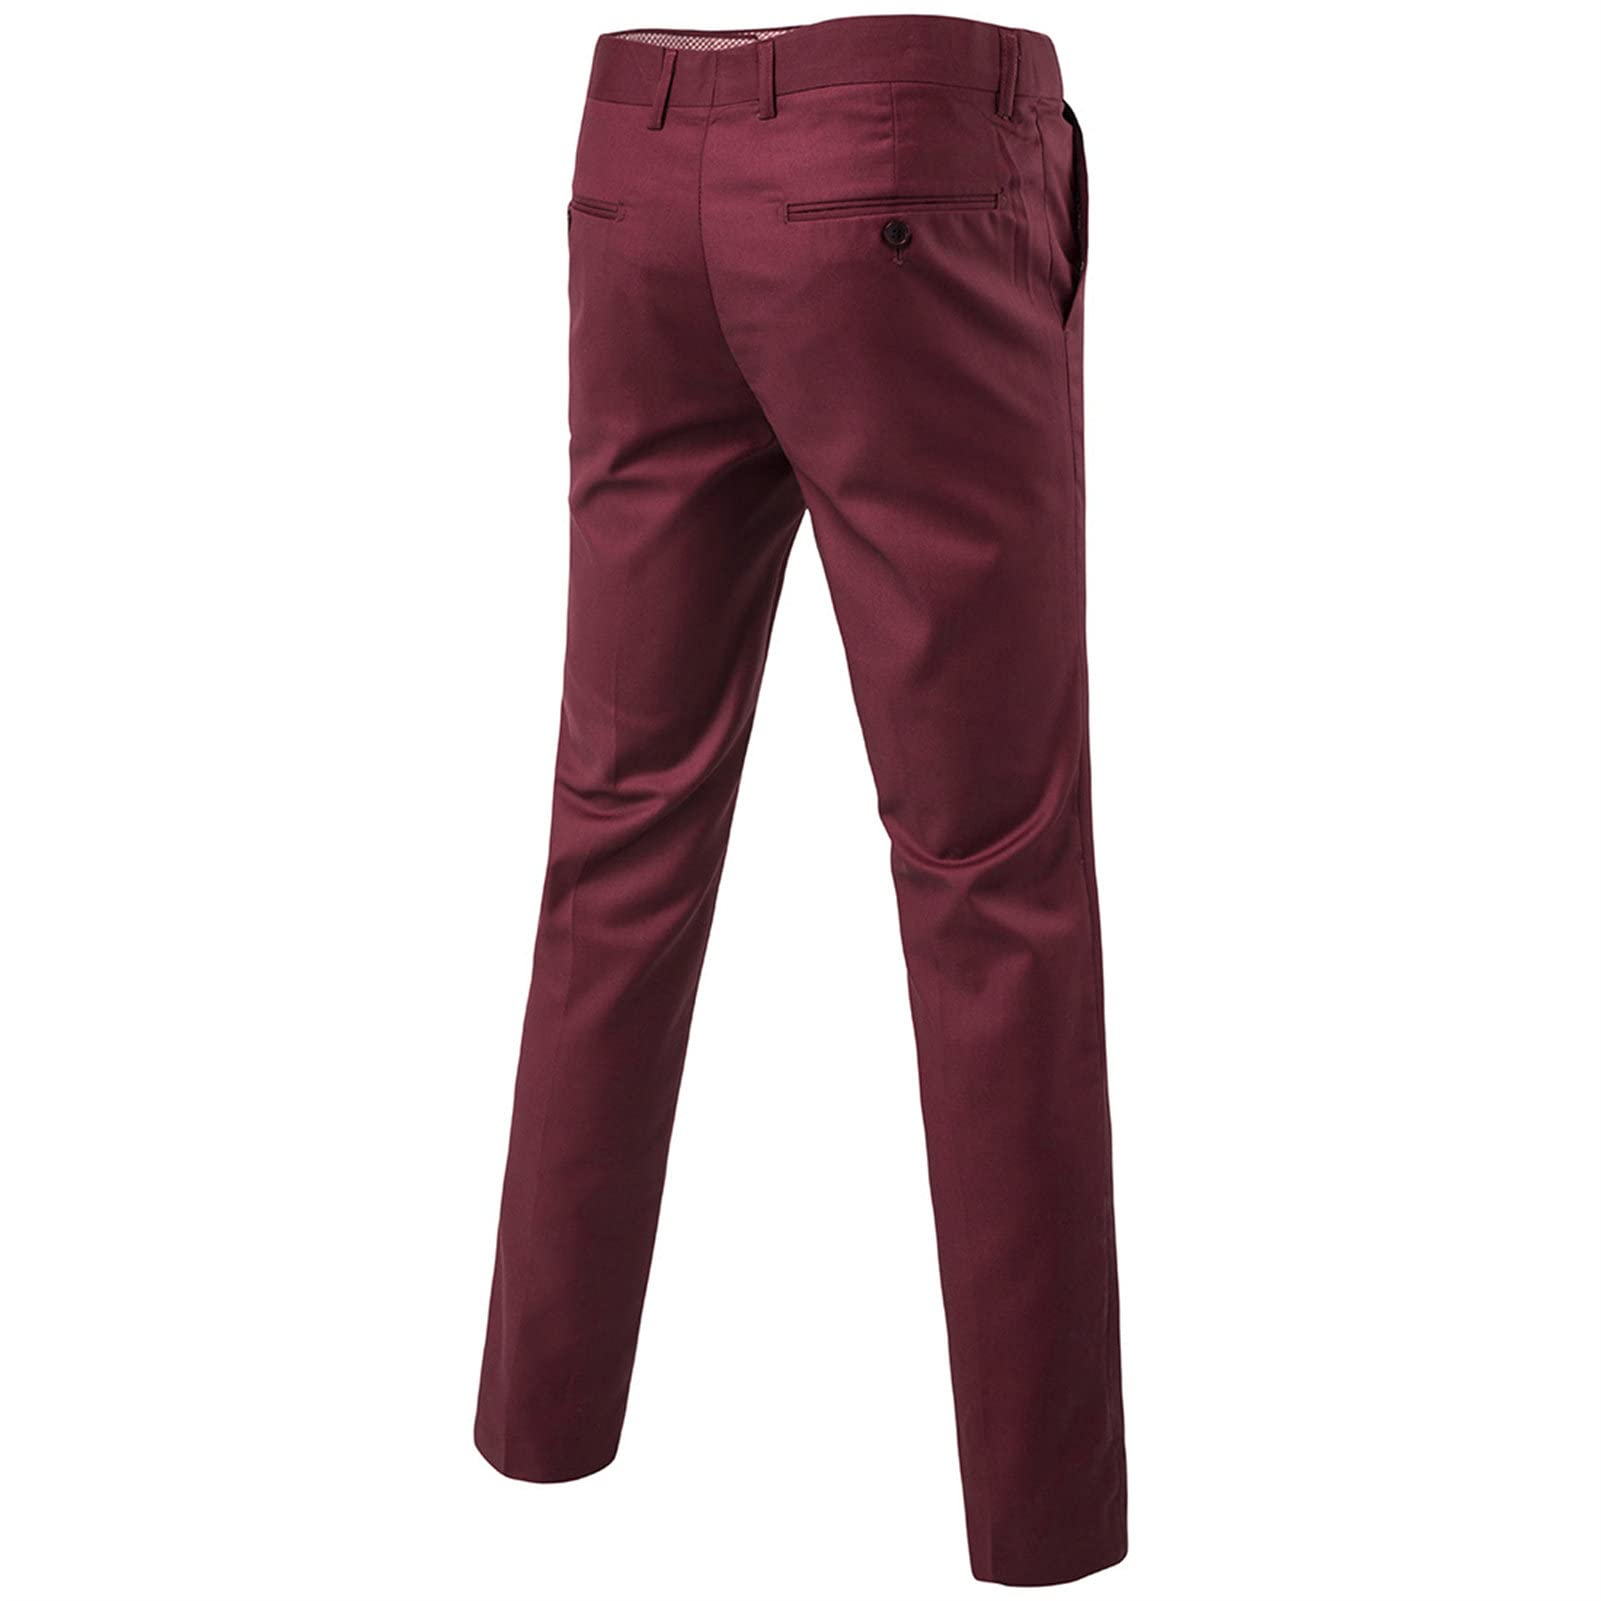 Men's Stylish Slim Stretch Pant Solid Color Skinny Fit Comfort Suit Pant Lightweight Comfort Business Trousers (Red,3X-Large)